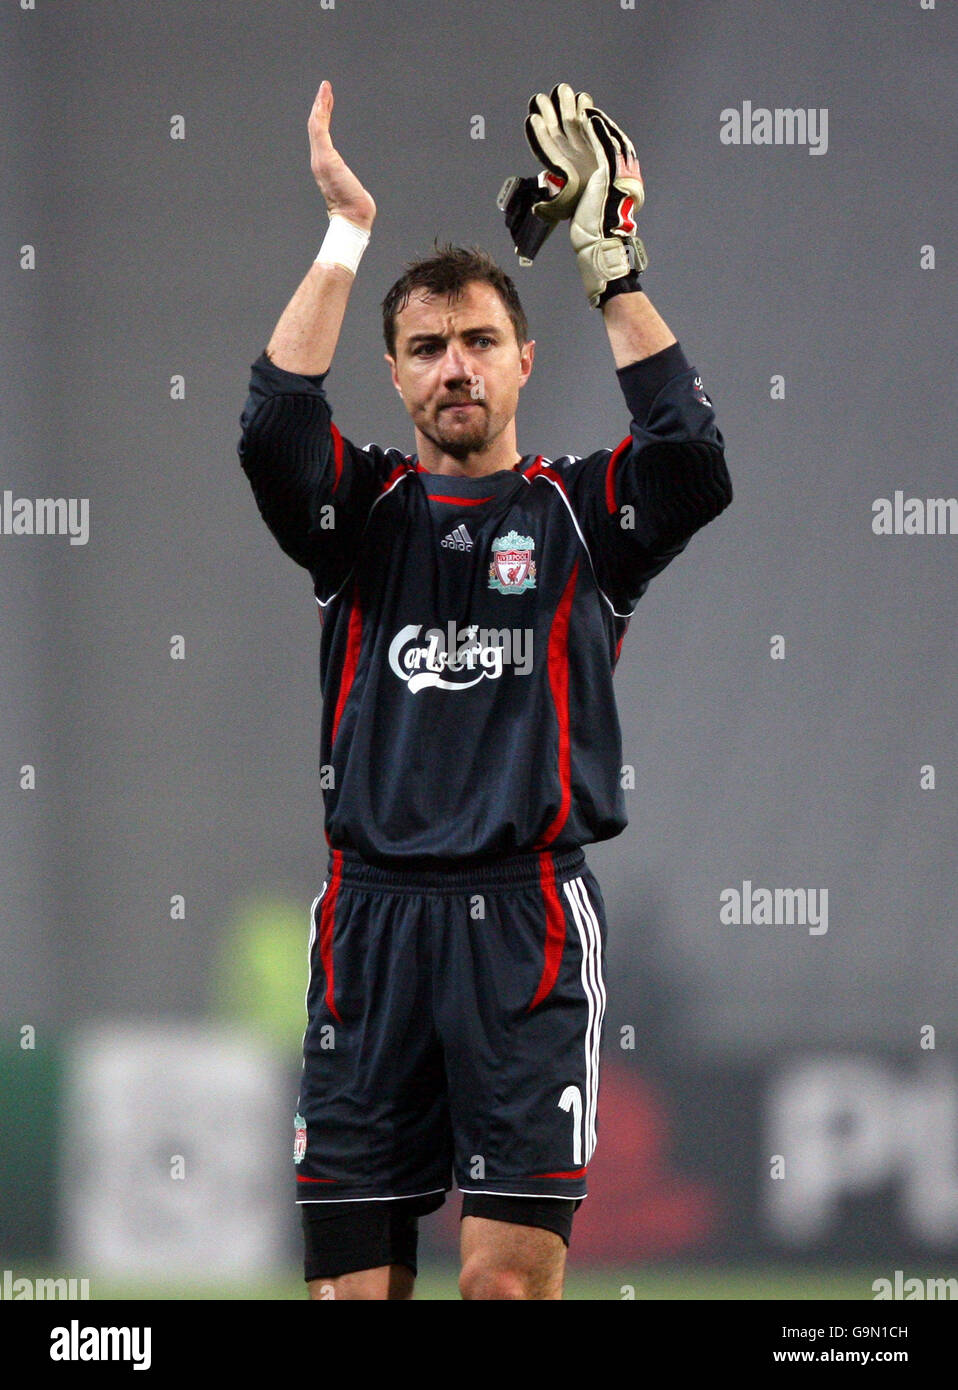 Soccer - UEFA Champions League - Group C - Galatasaray v Liverpool - Ataturk Olympic Stadium. Liverpool's goalkeeper Jerzy Dudek walks off dejected after defeat against Galatasaray Stock Photo